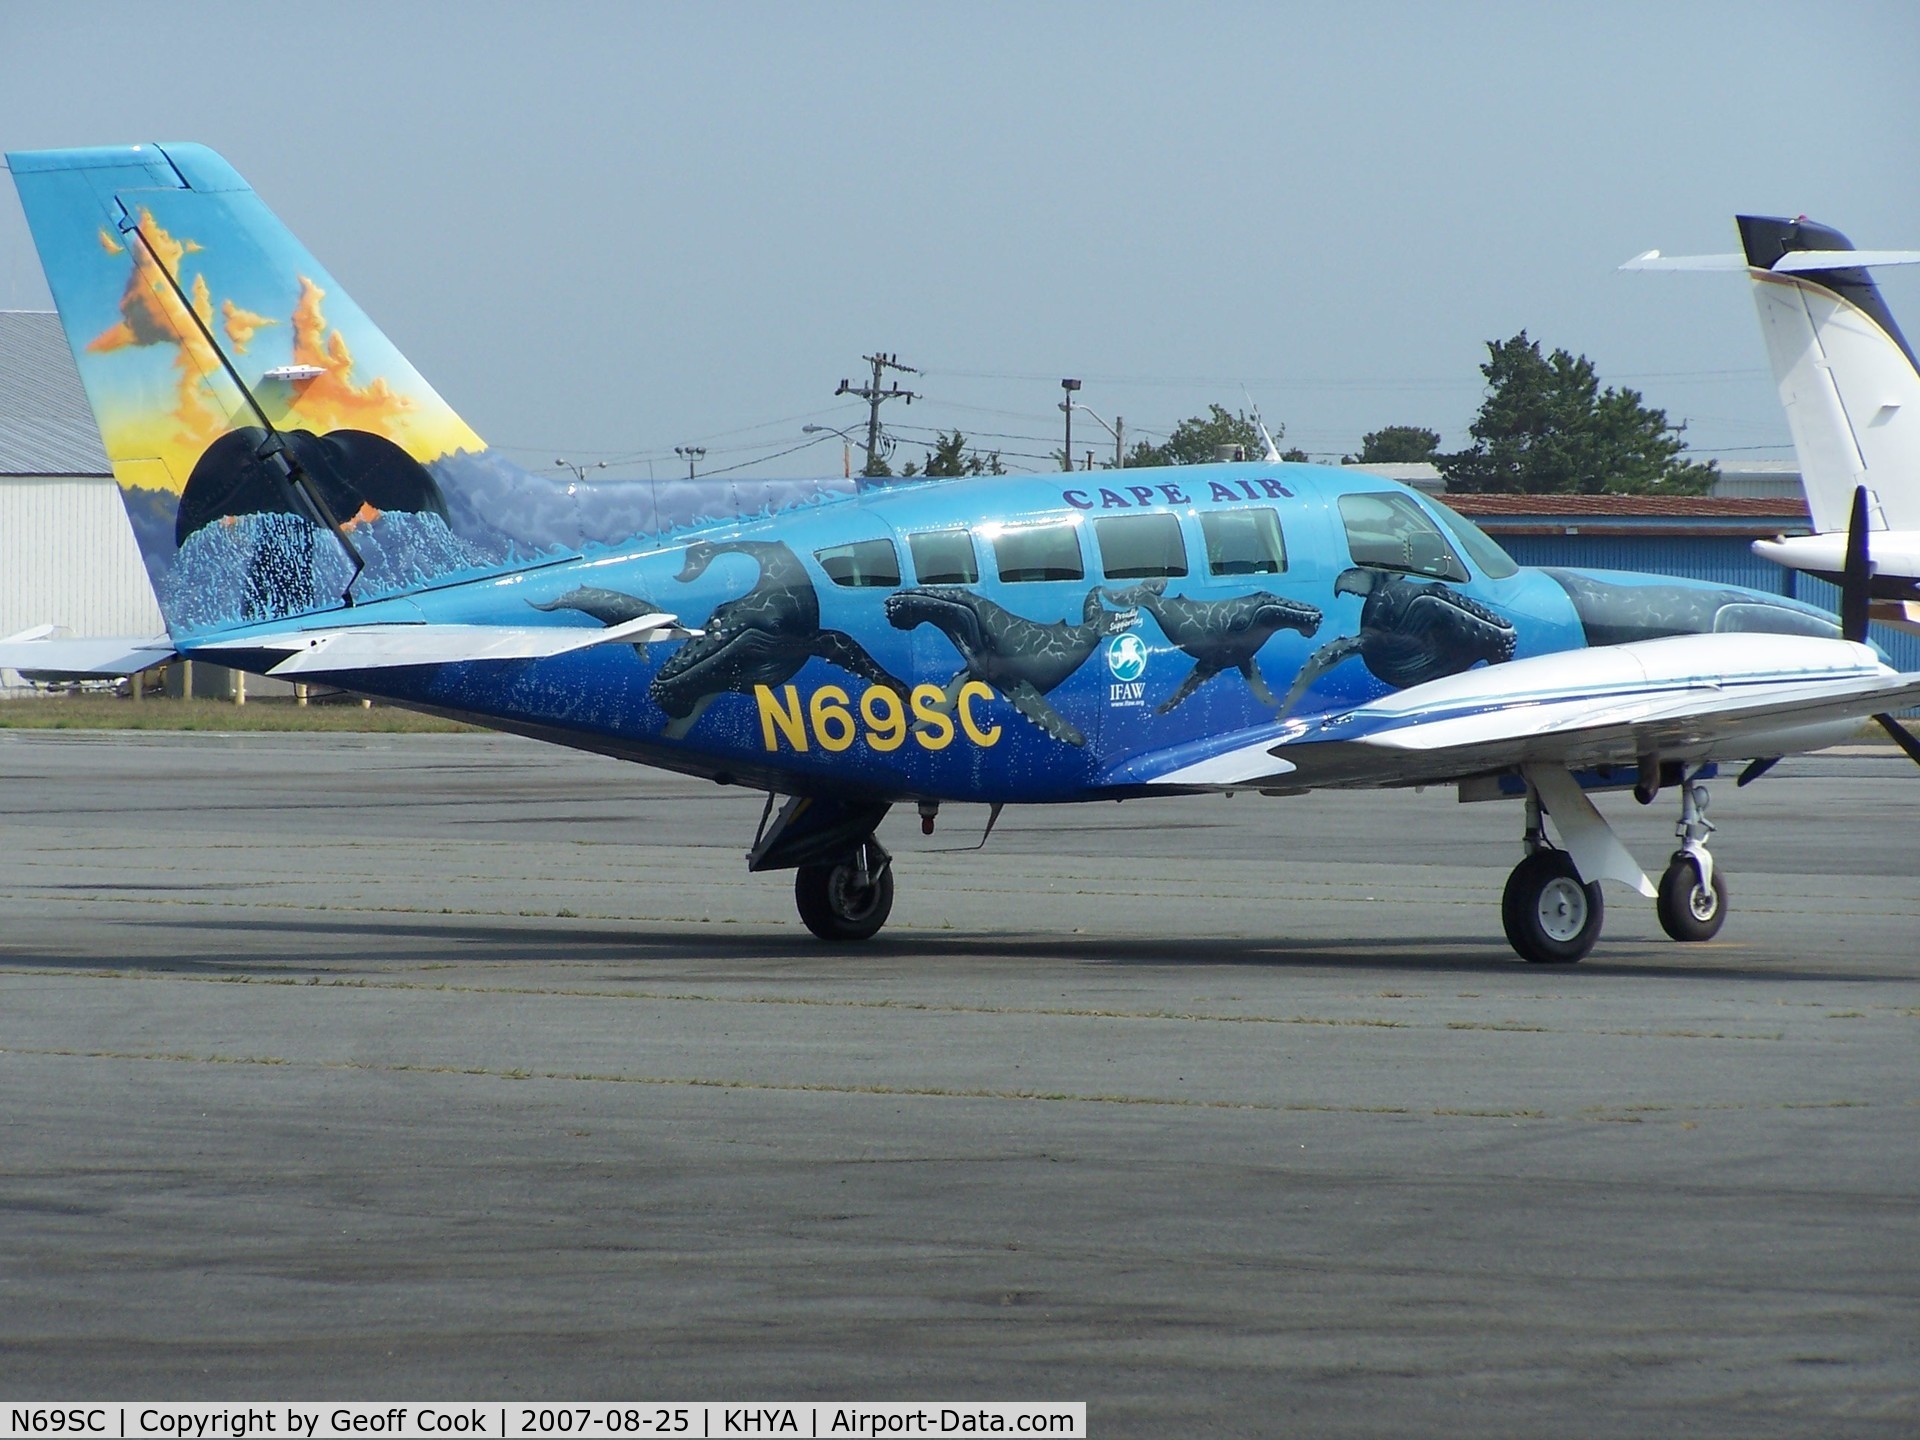 N69SC, 1979 Cessna 402C II C/N 402C0041, N69SC Cape Air in a very colourful livery on the company's ramp